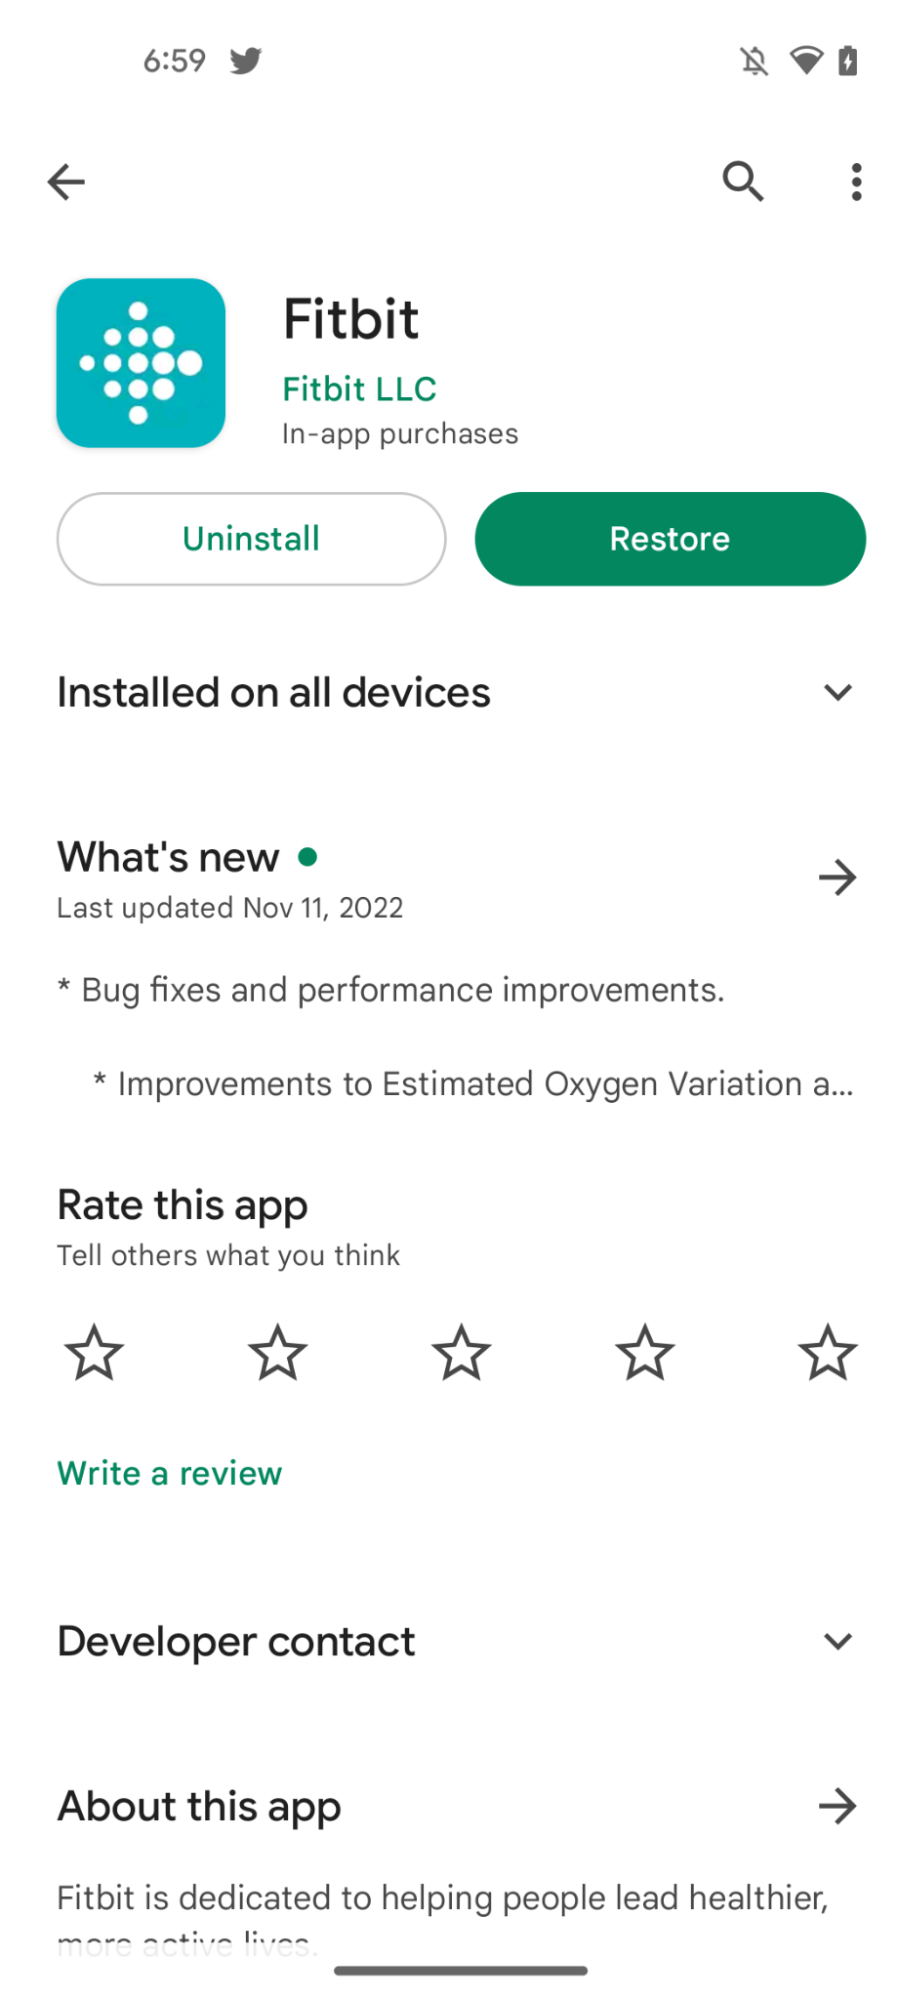 Restore apps on Google Play